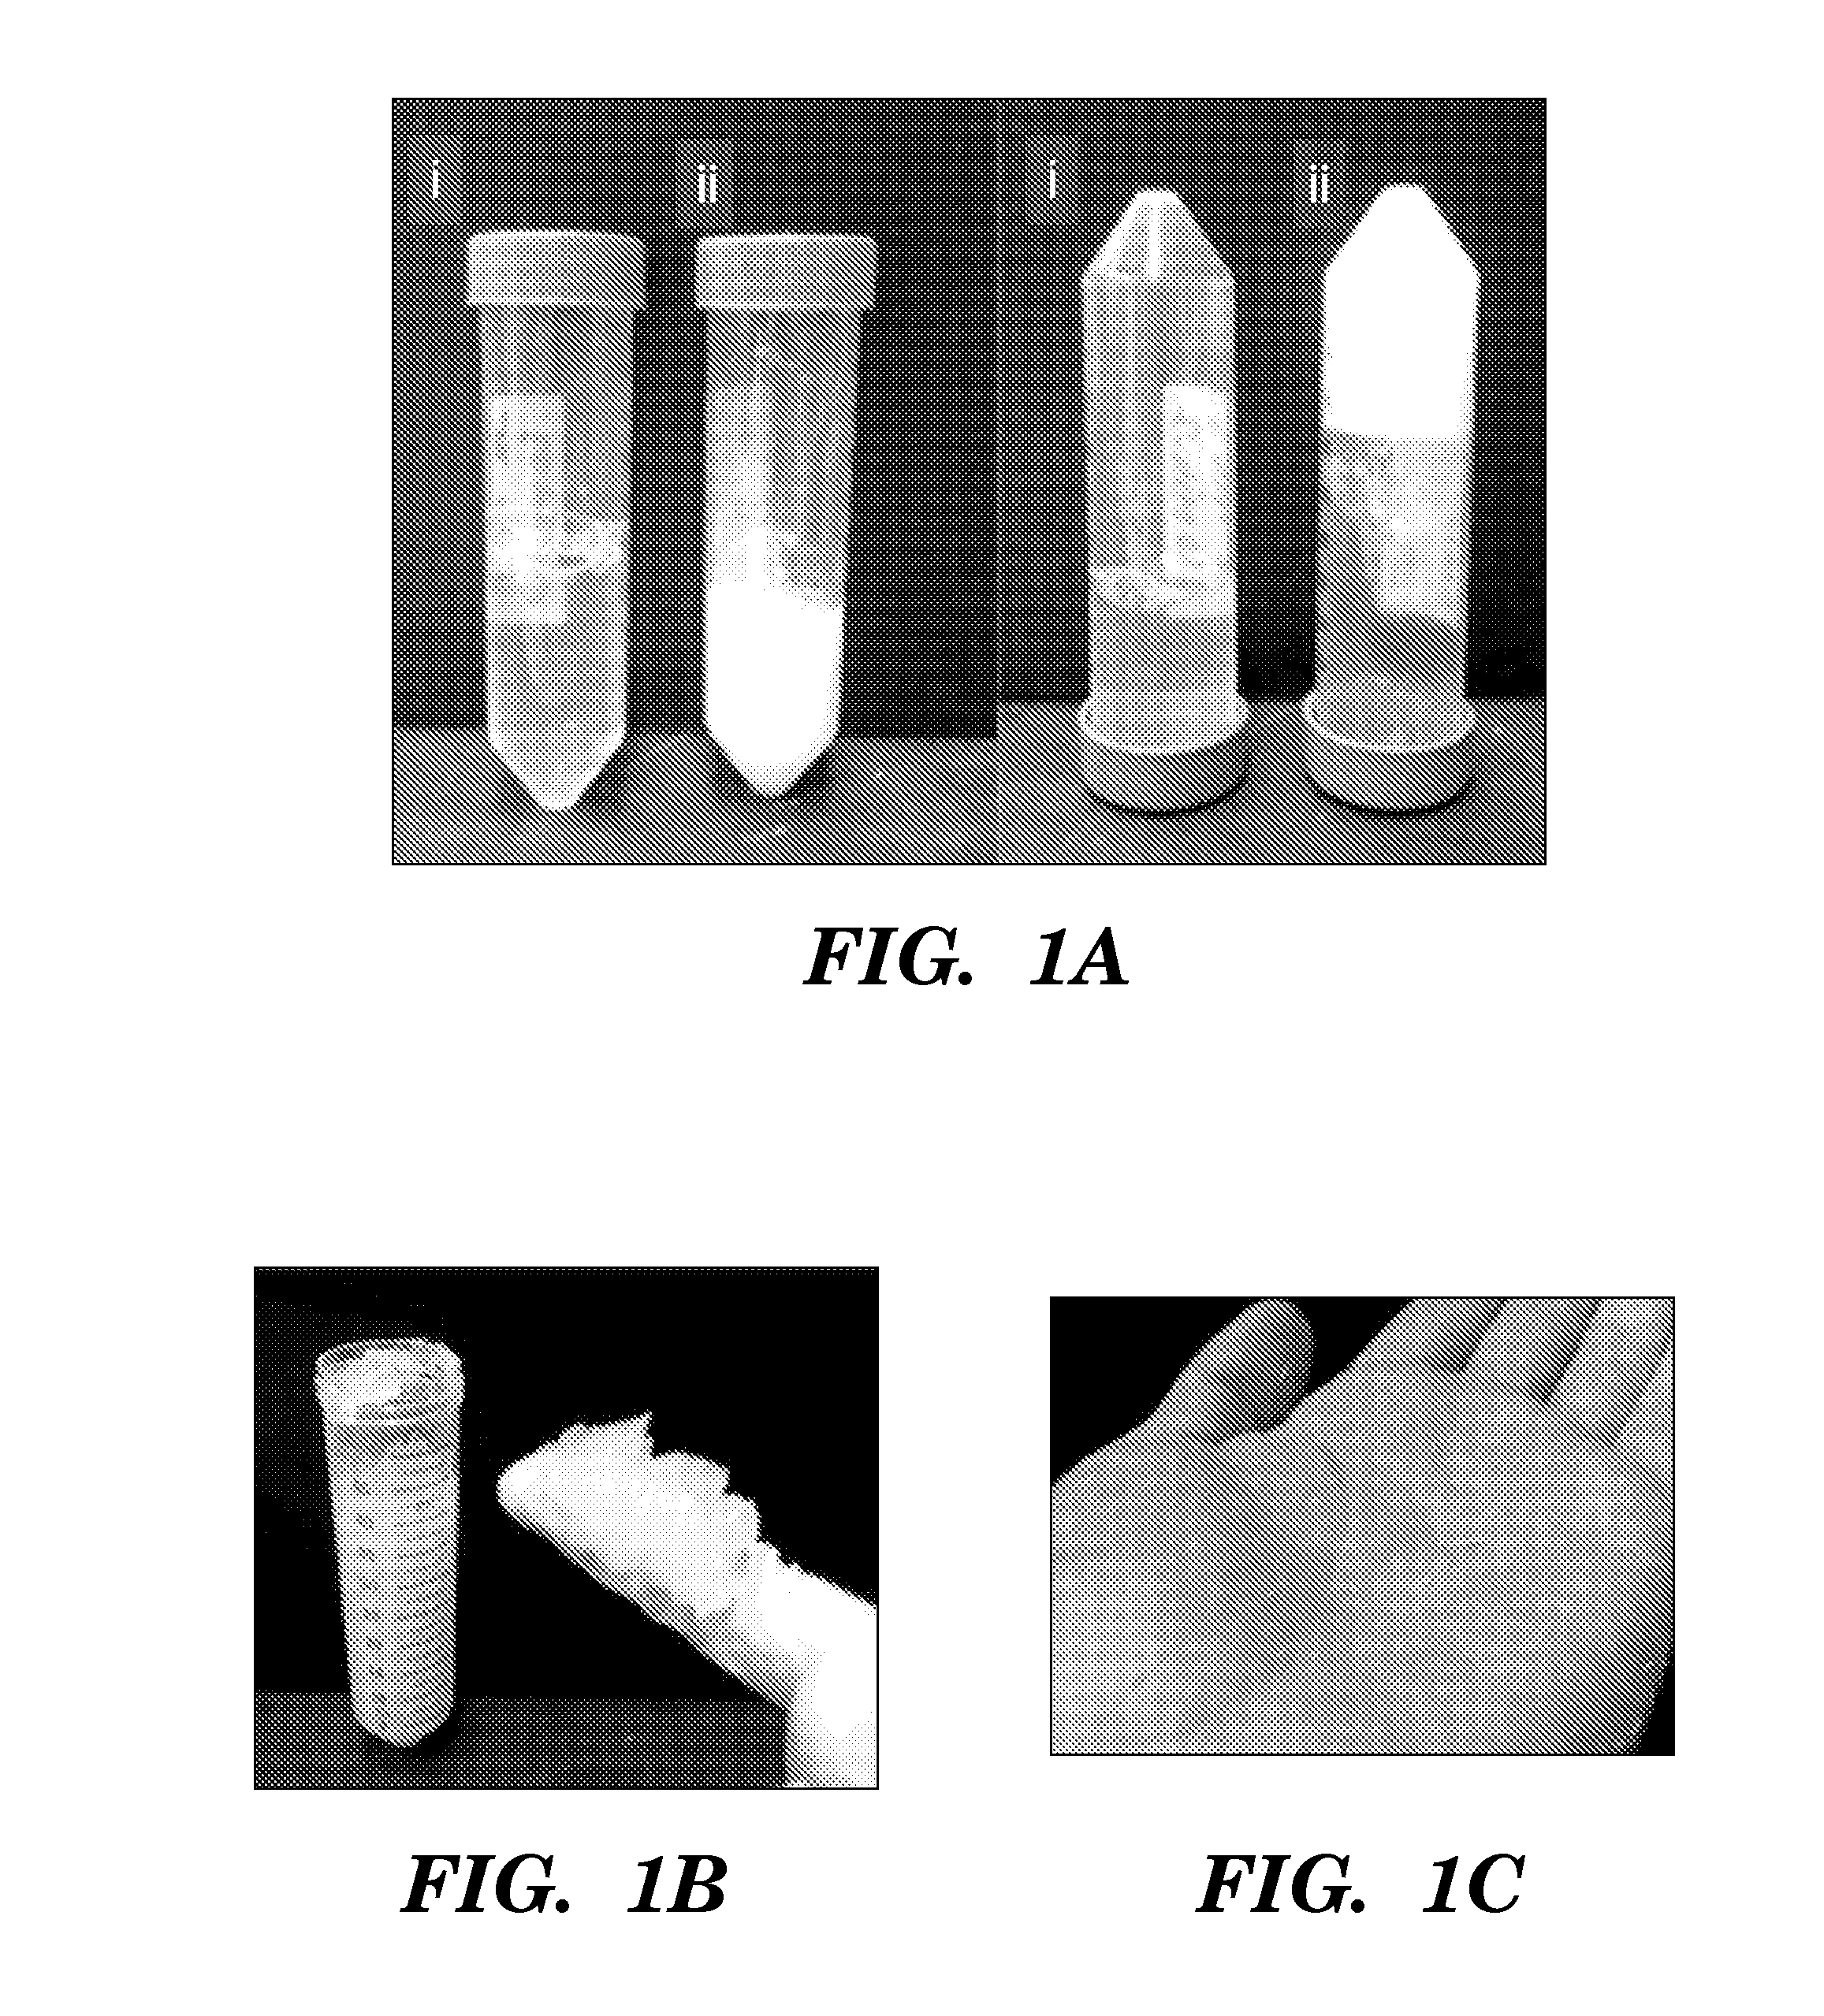 Silk fibroin-based personal care compositions